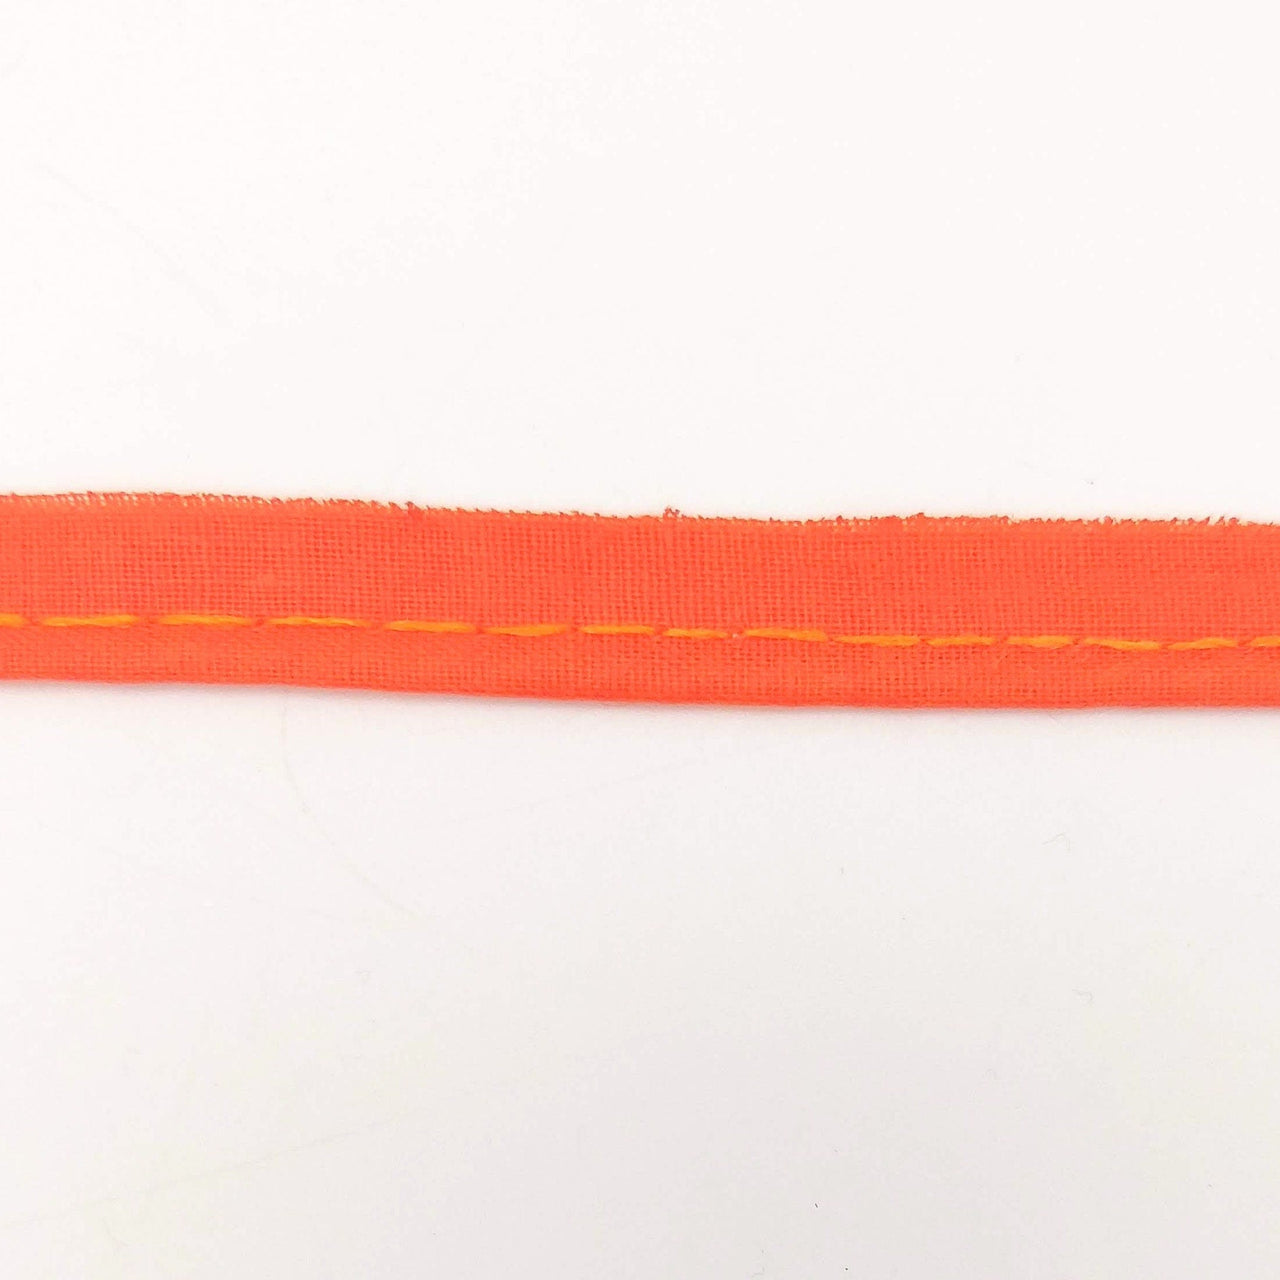 3 Yards, 5mm Flanged Insertion Piping on 10mm Band, Orange Fabric Trim